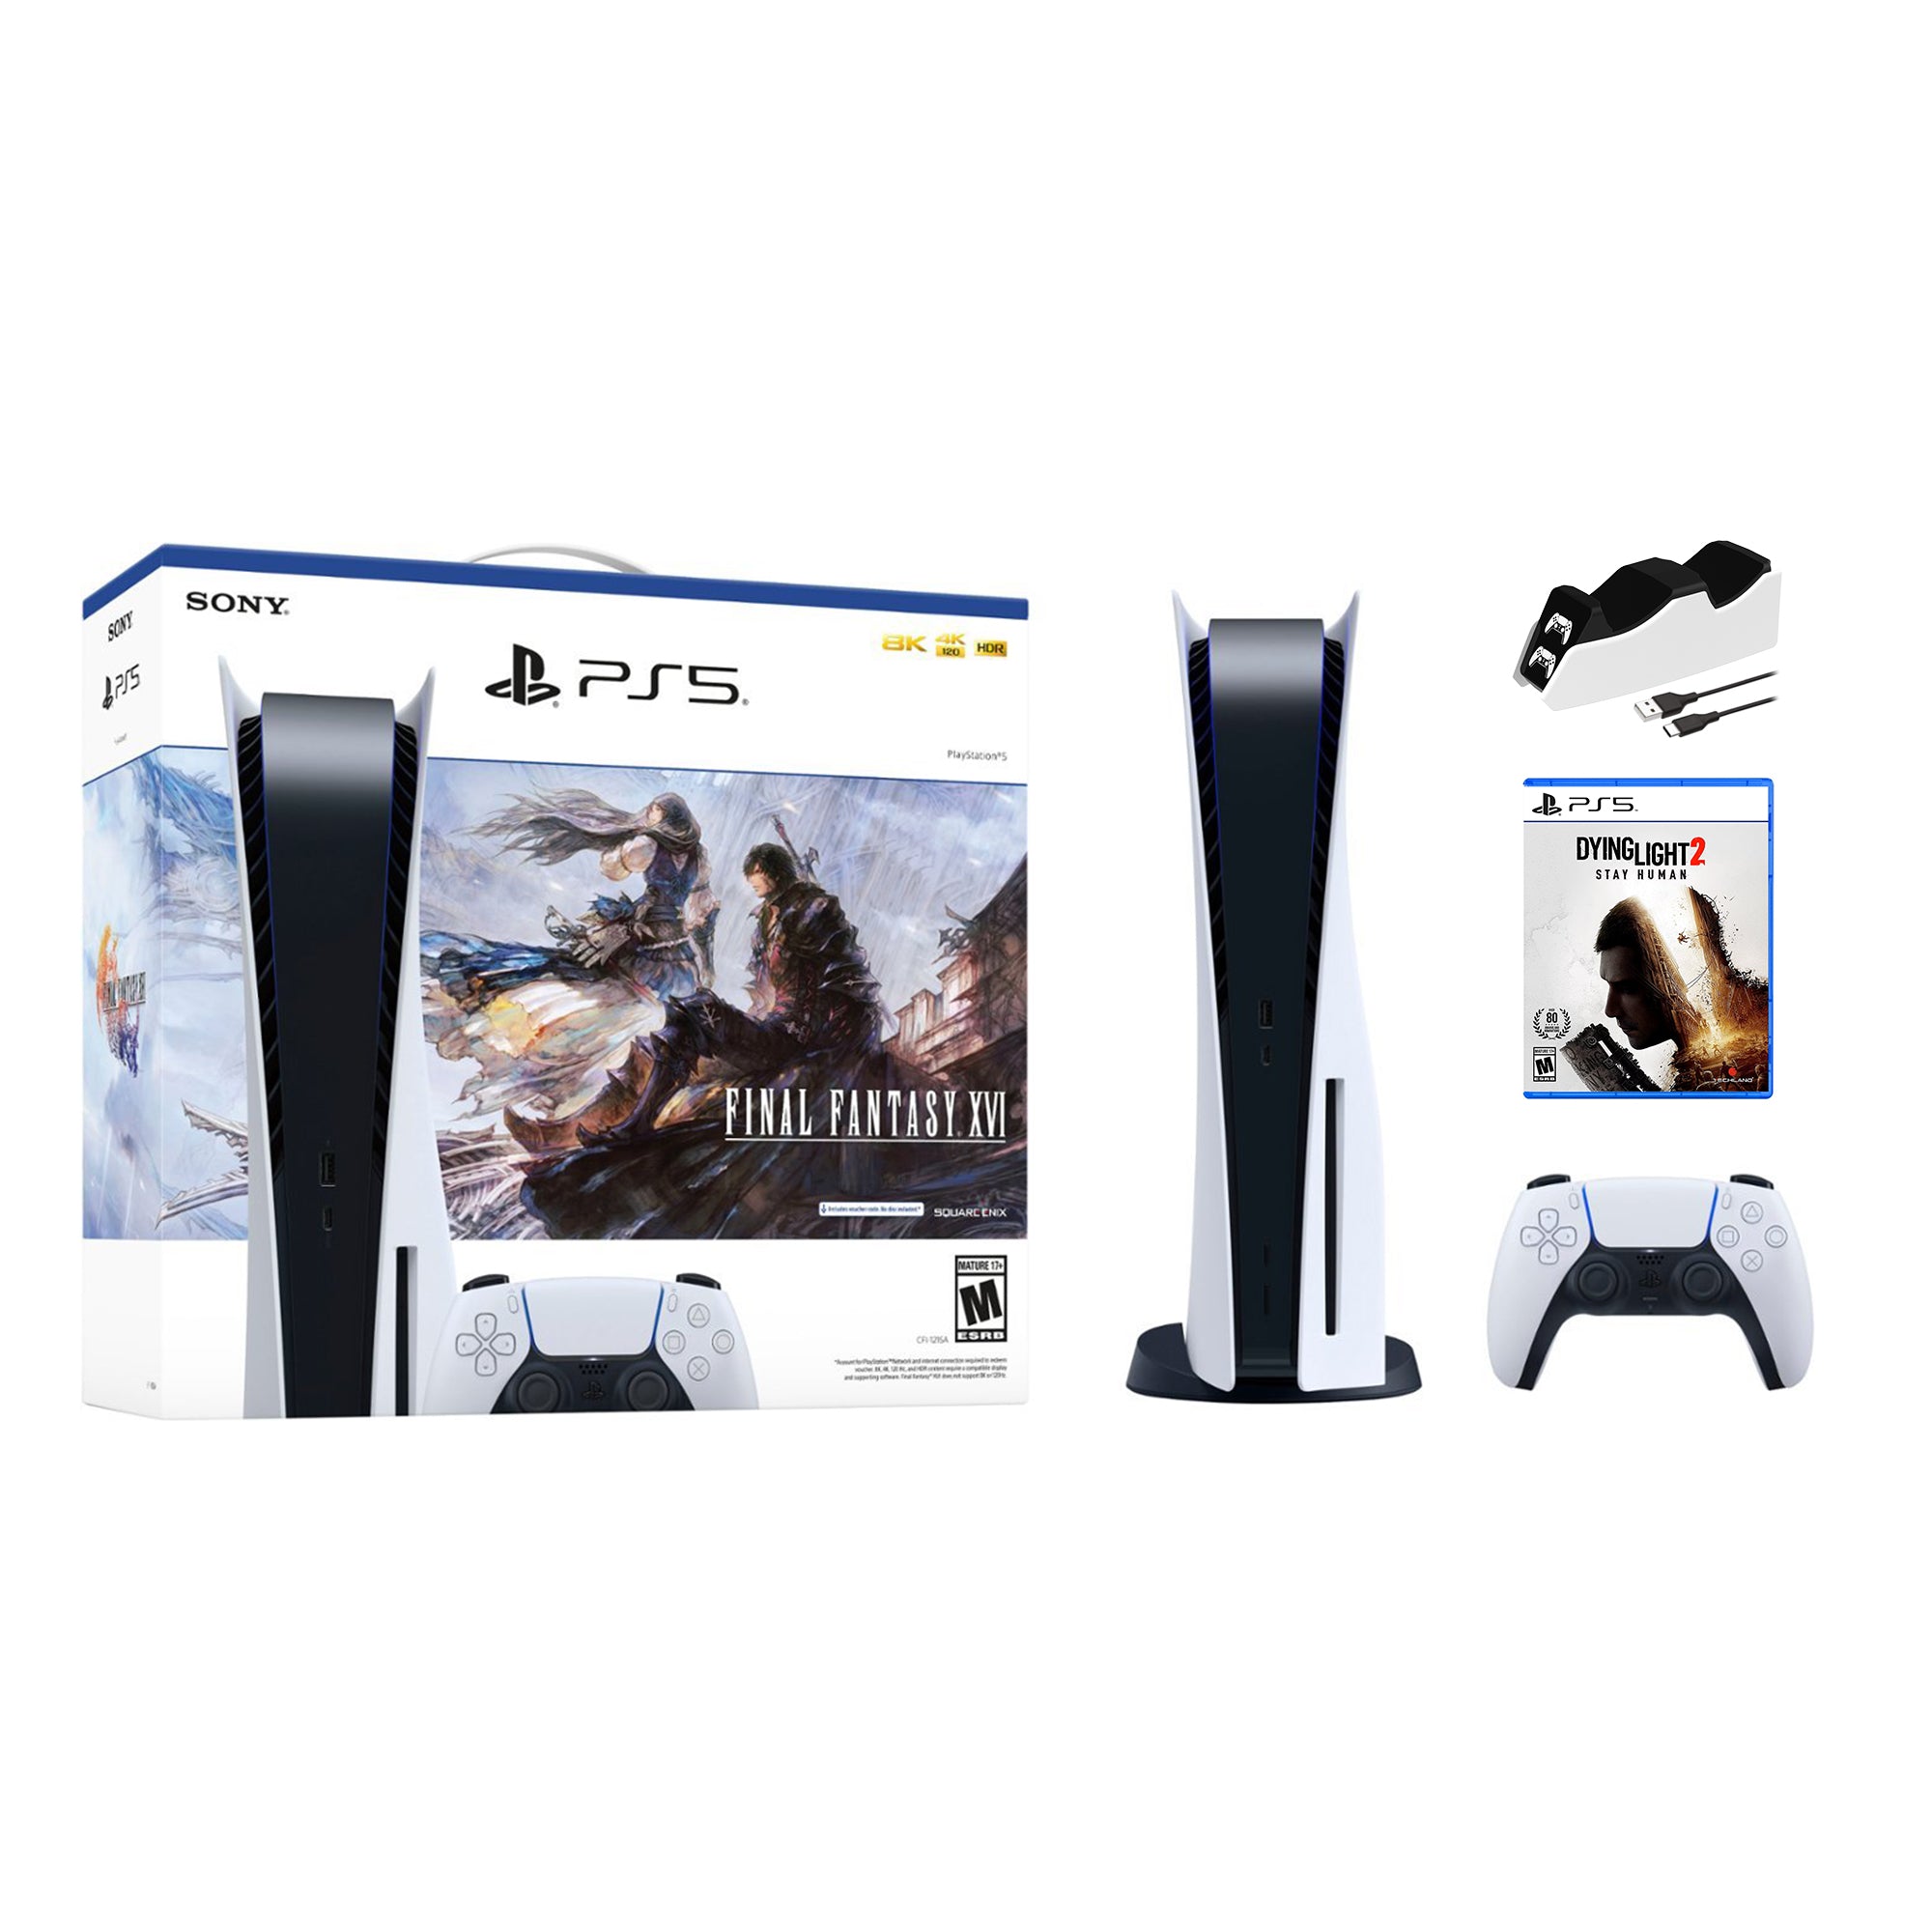 Playstation 5 Disc Edition FINAL FANTASY XVI Bundle with Dying Light 2 Stay Human and Mytrix Controller Charger - PS5, White